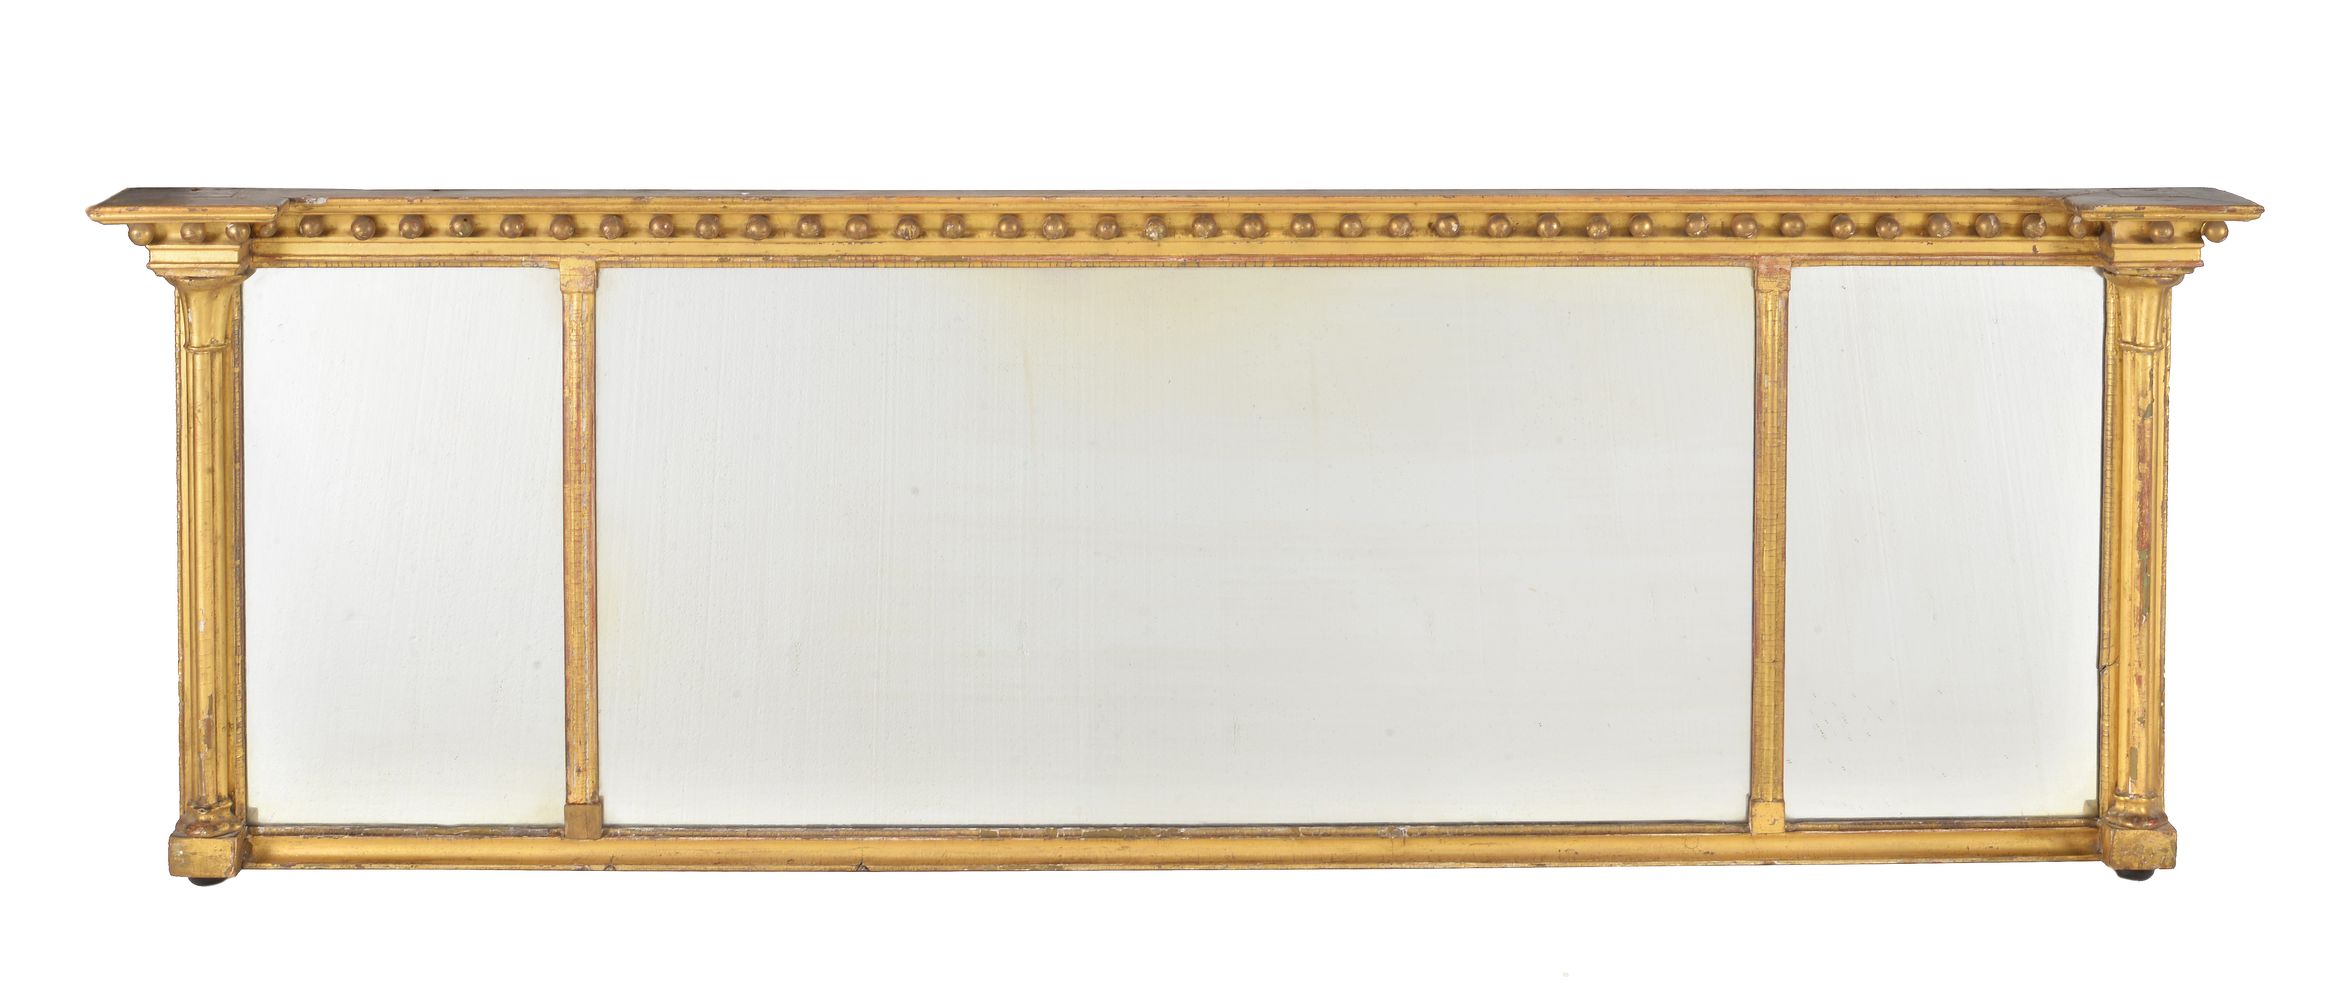 A Regency giltwood and composition overmantel mirror